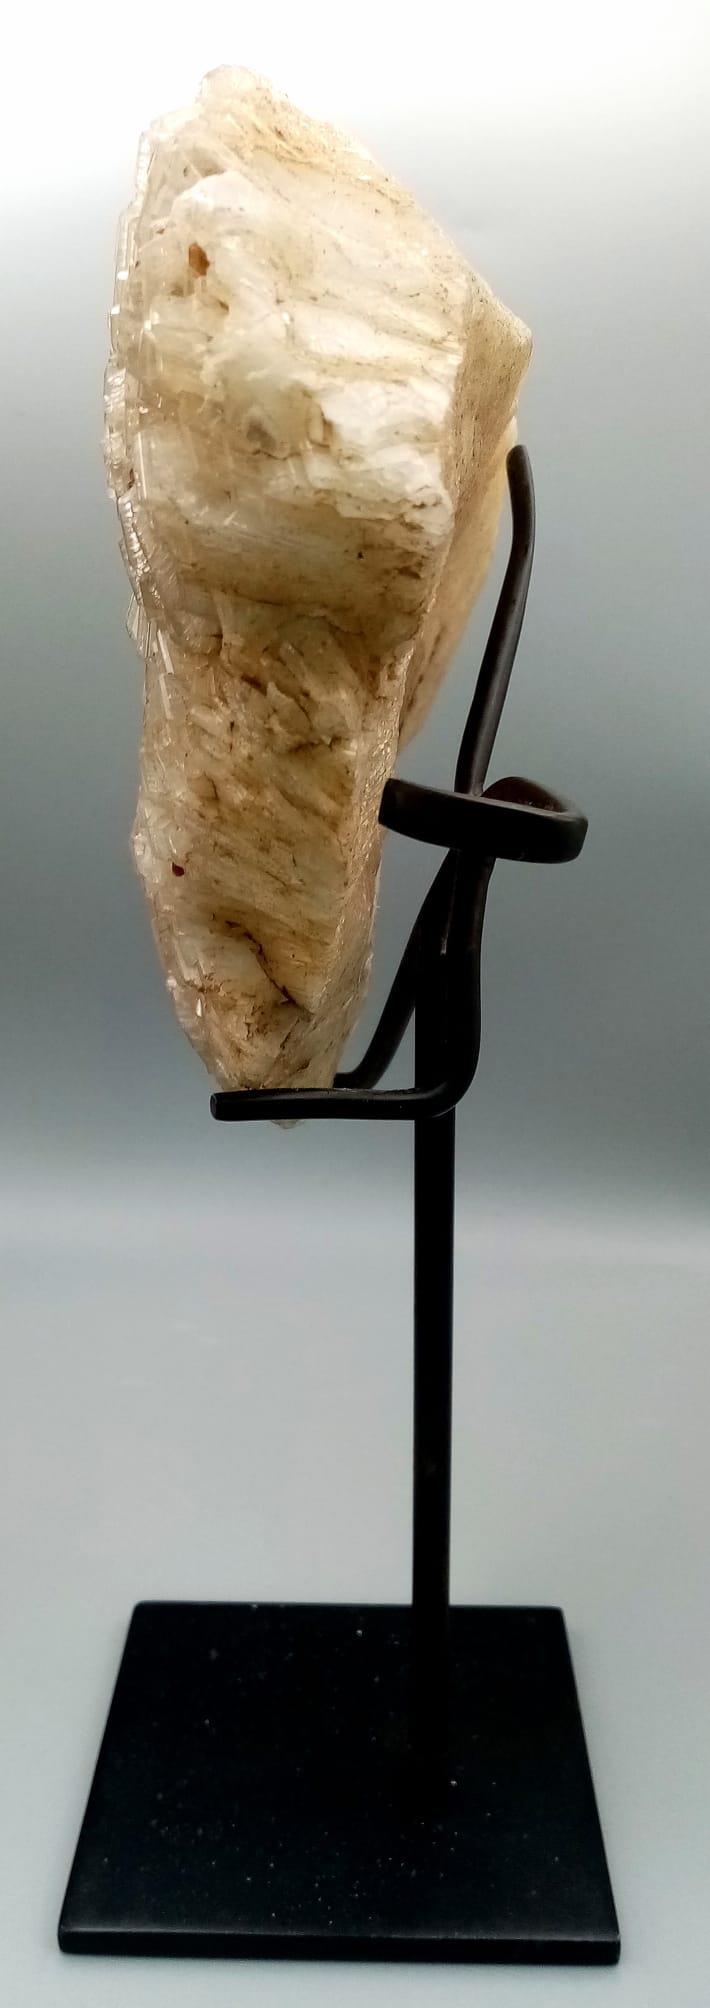 A Large Crystal Mass Specimen of Clevelandite Crystals - on metal stand. 14cm x 16cm. 1020g weight. - Image 2 of 4